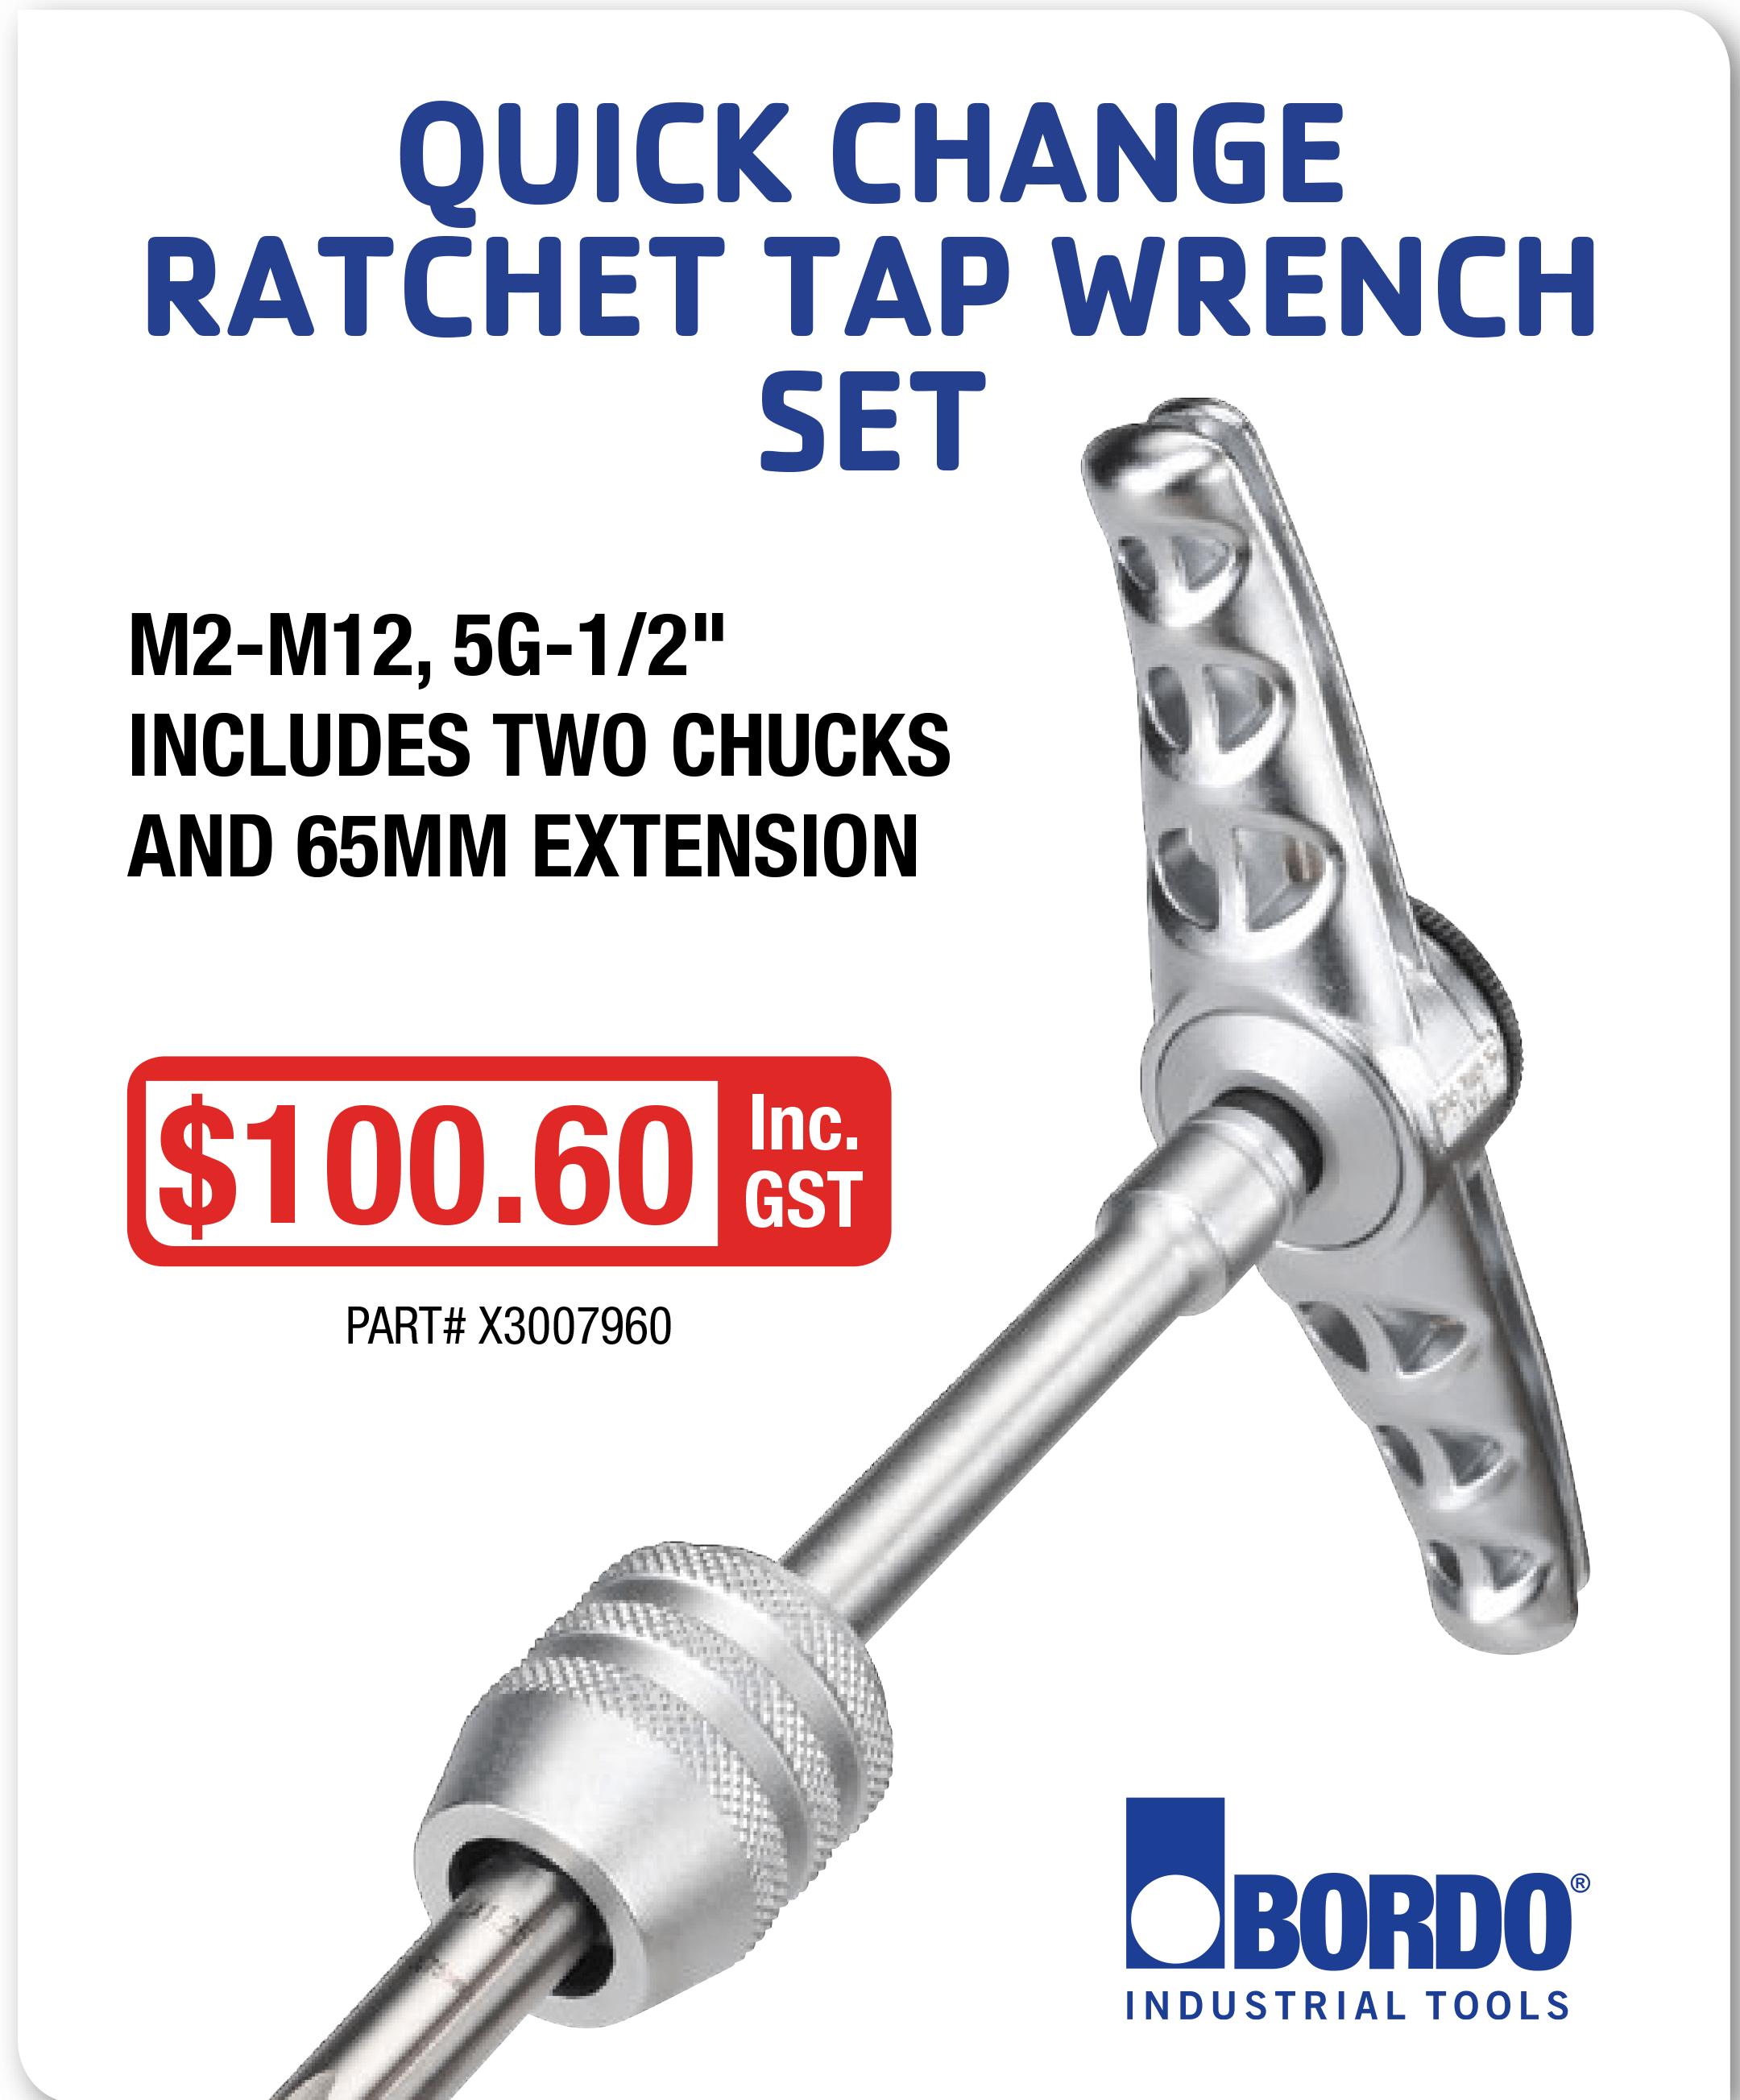 Ratchet Tap Wrench Set